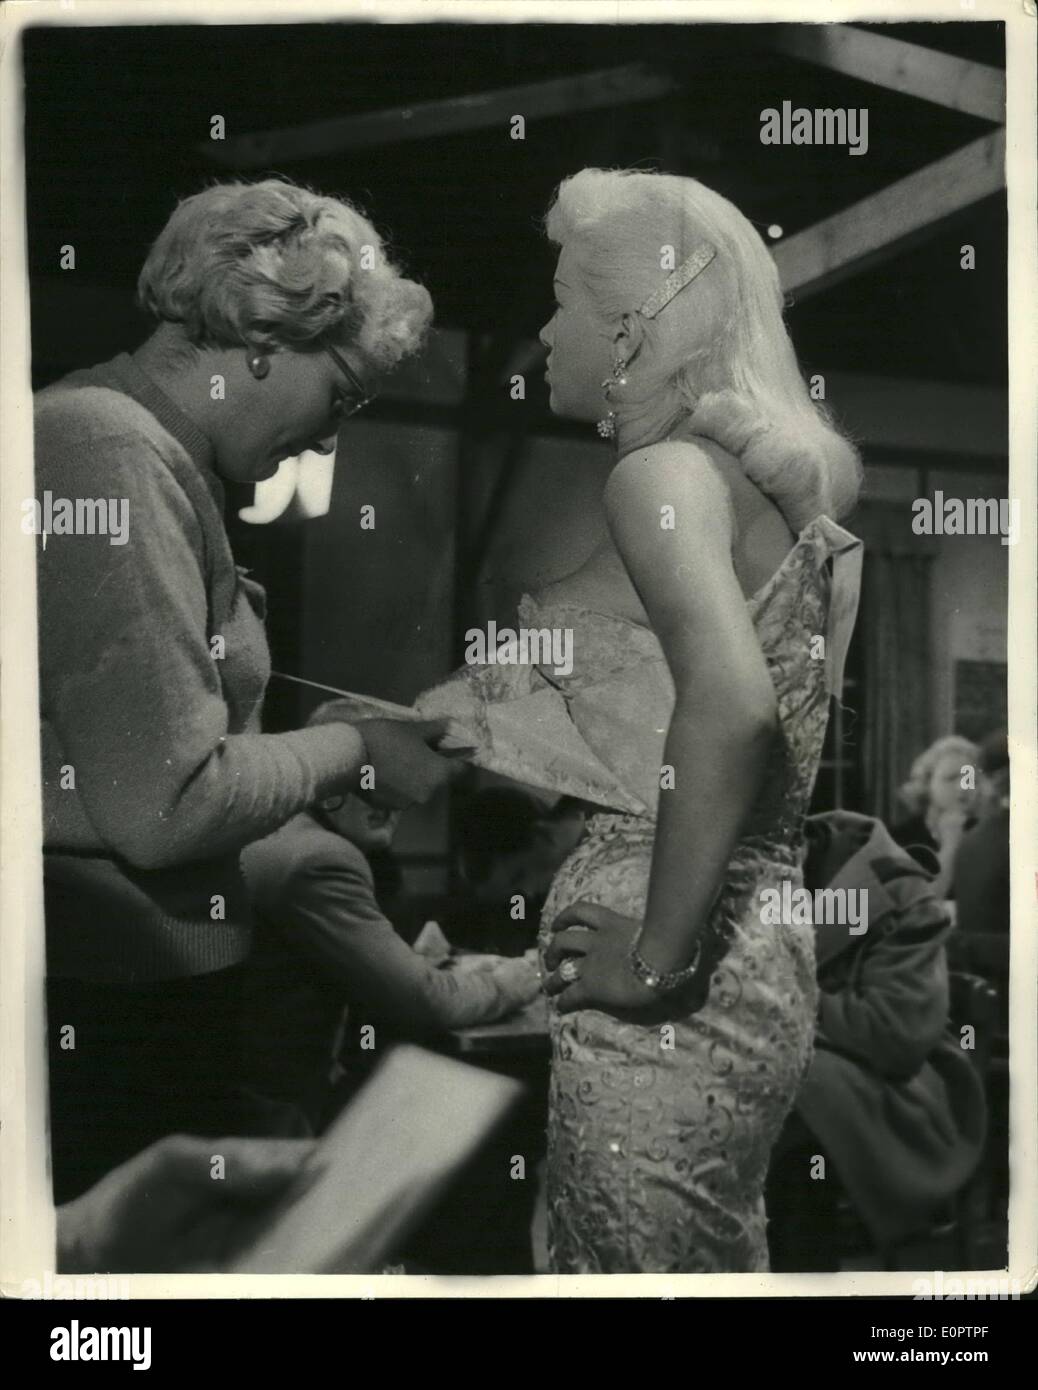 Feb. 28, 1957 - 28-2-57 The son of a Marchioness rips Diana Dors' gown from her shoulder. But it is all in a film. During the filming of the The Long Haul at Shepperton Studios yesterday, actor Patrick Allen, 30-year old son of the Marchioness of Downshire (by her first marriage) had to rip the shoulder strap of Diana Dors' evening gown during a scene in a road transport caf&eacute;. In the film Dina Dors co-stars with Victure Mature for the first time Stock Photo